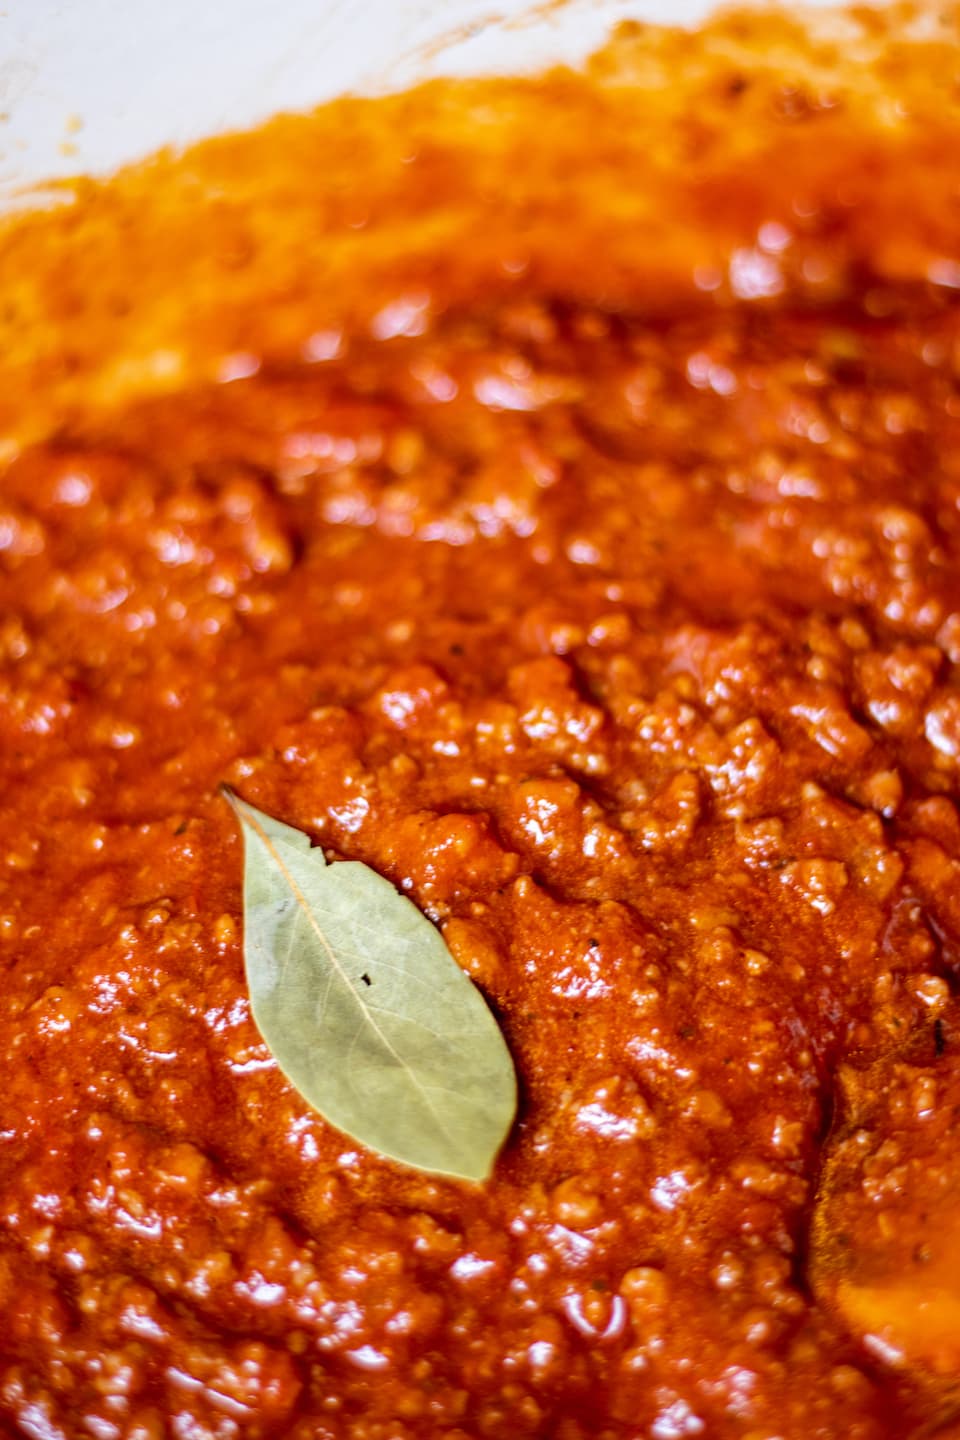 a bay leaf on top of bright red spaghetti sauce